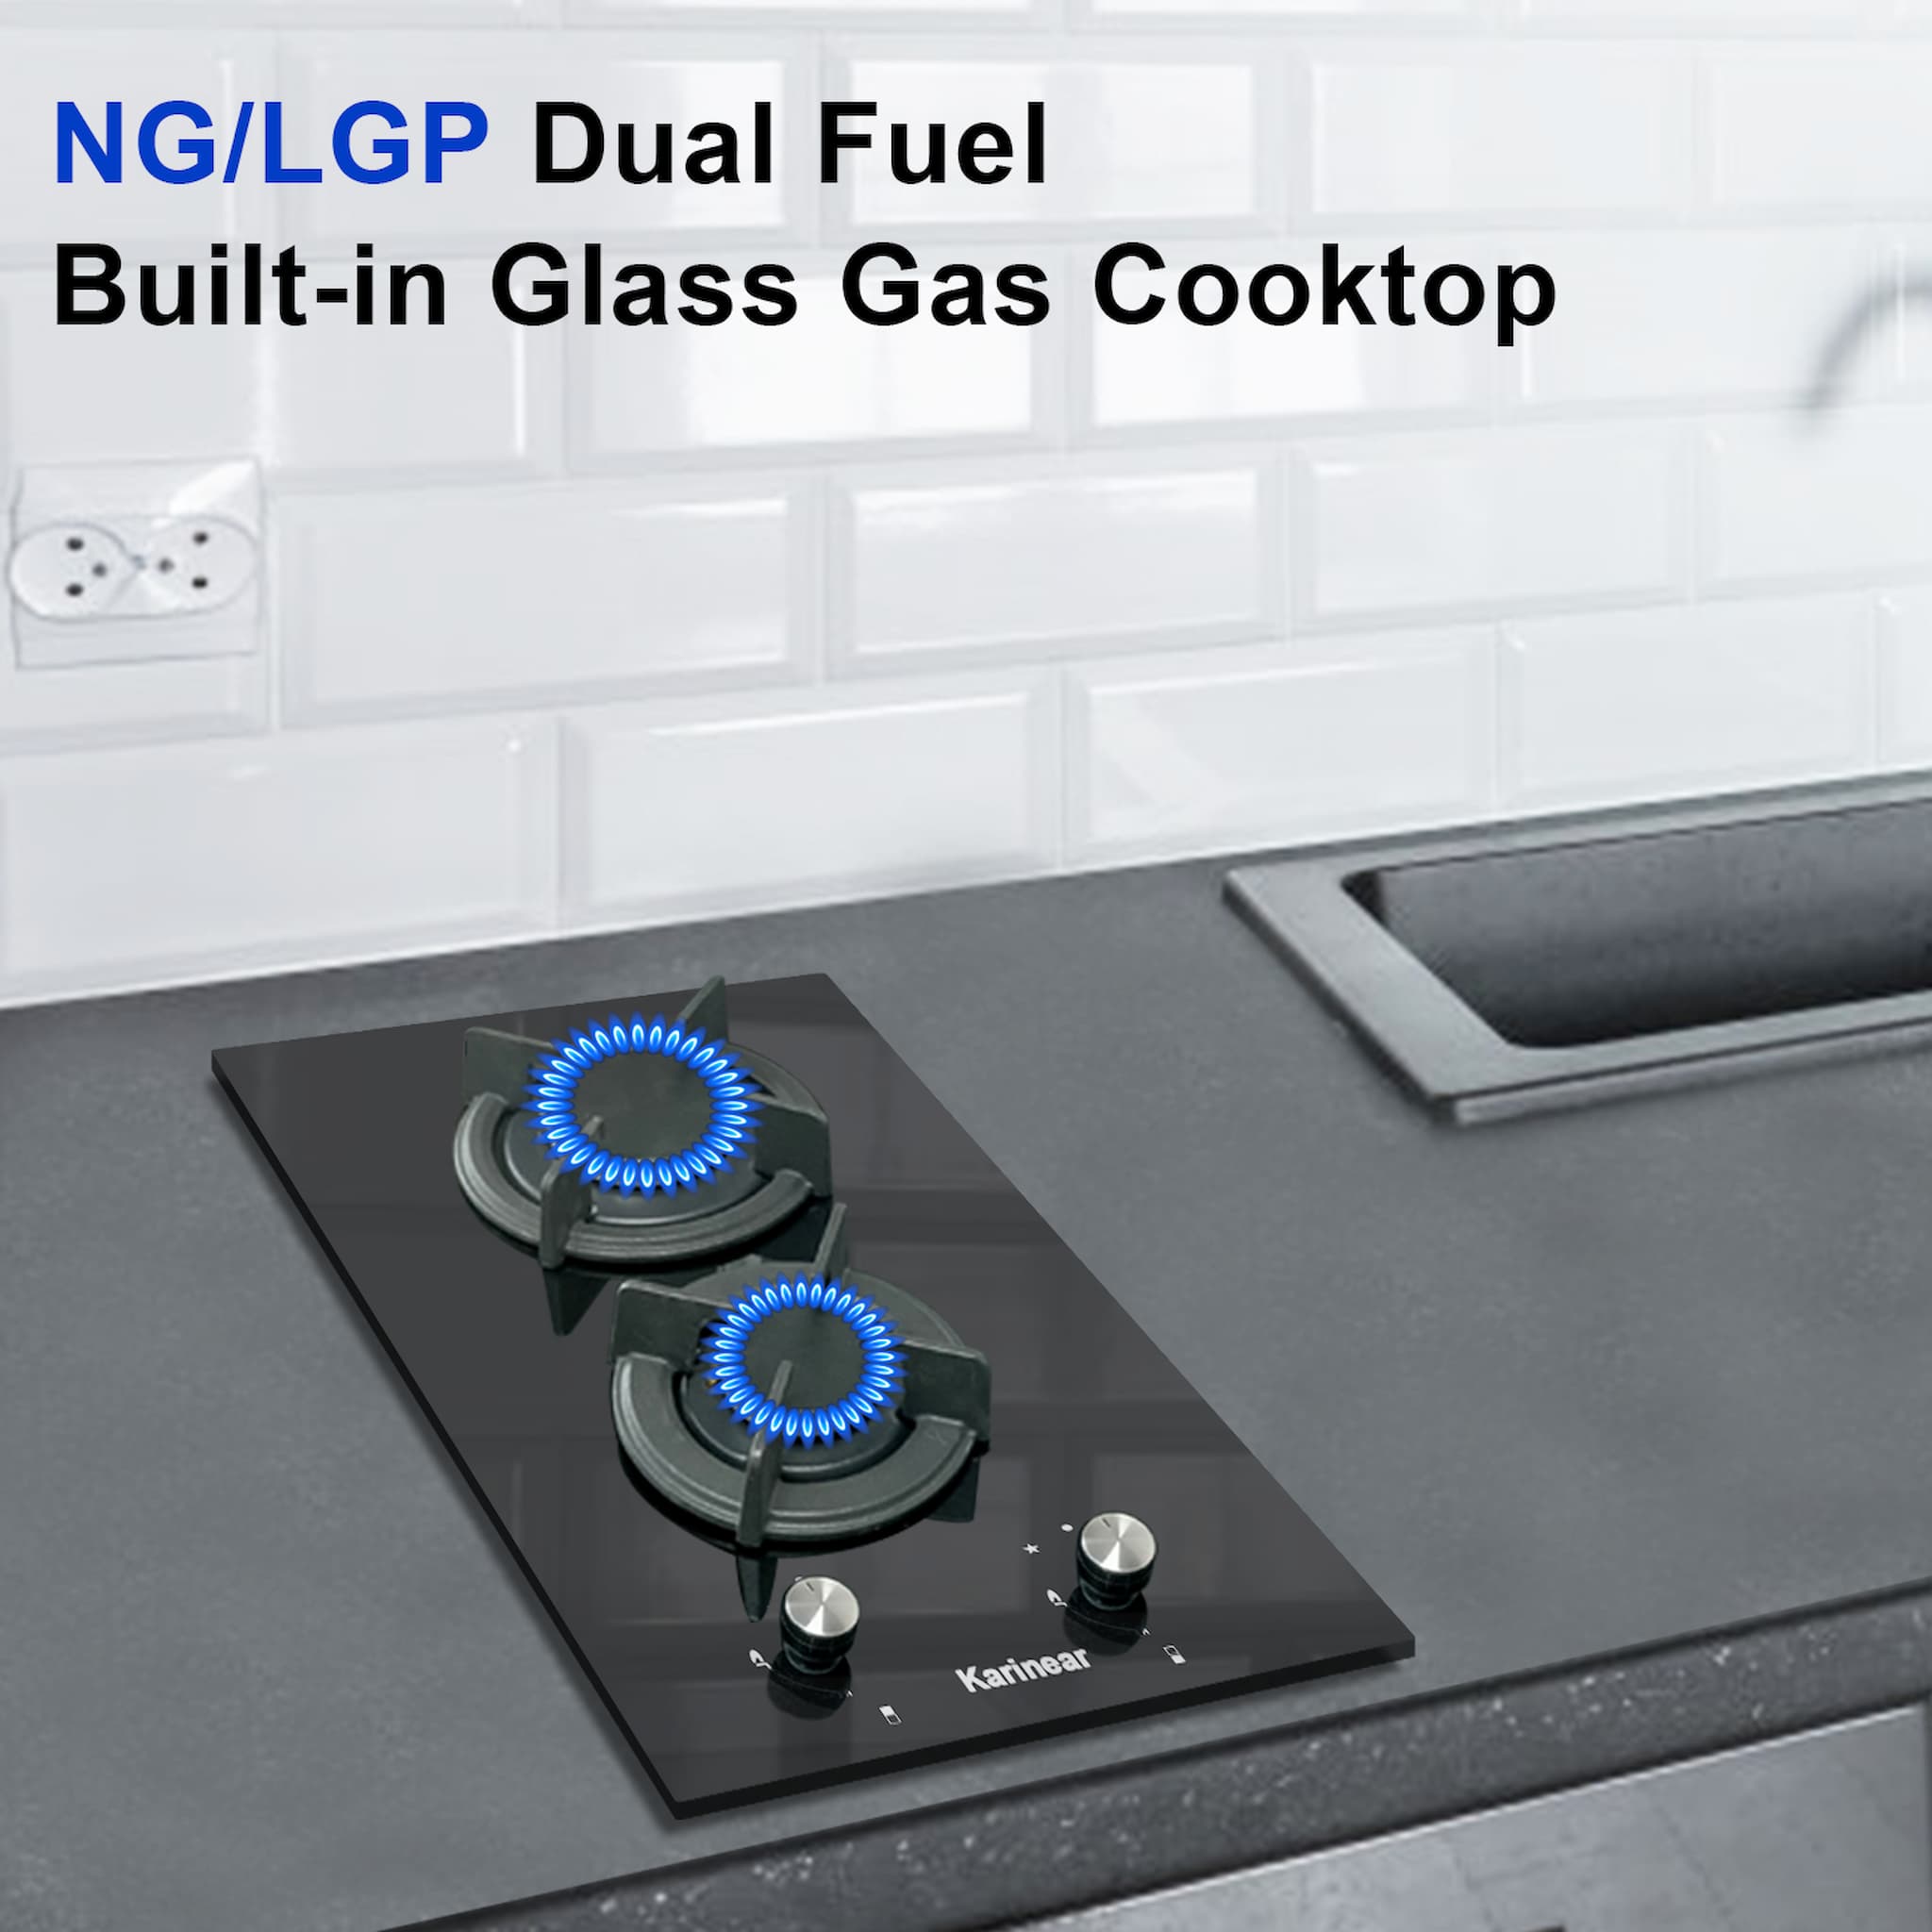 1. The initial setting of the 2 burners gas cooktop is for natural gas. If you want use liquid propane you have to change the NG nozzles into LPG nozzles.